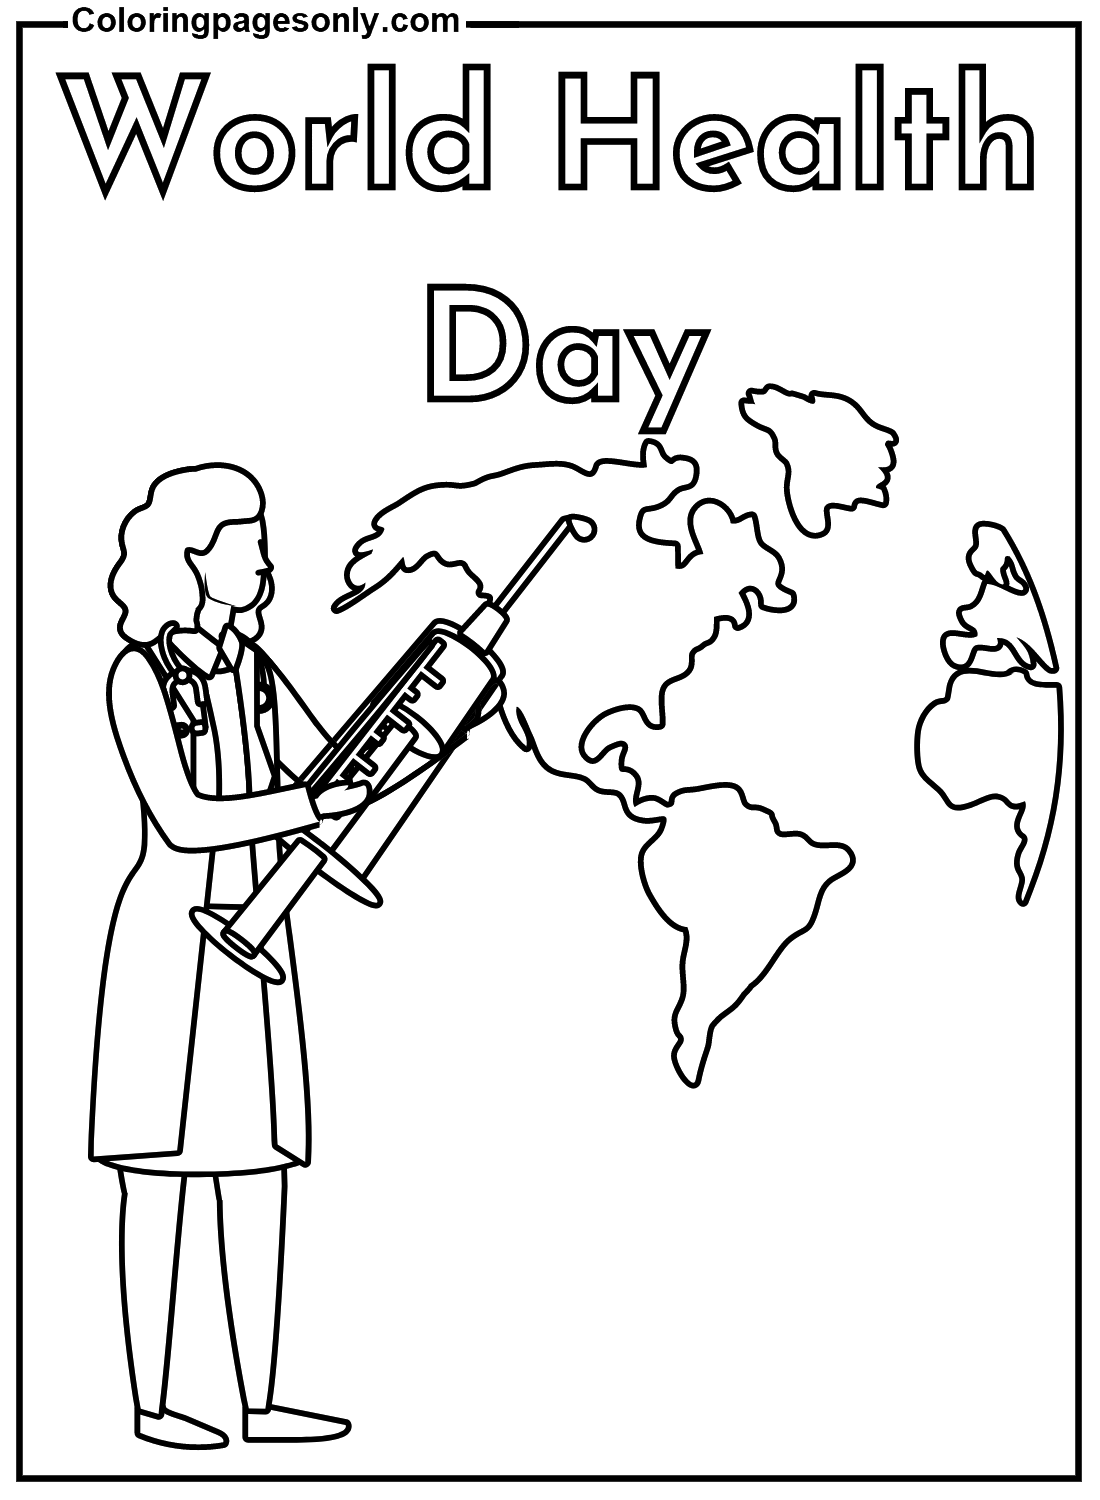 World Health Day To Print Coloring Pages